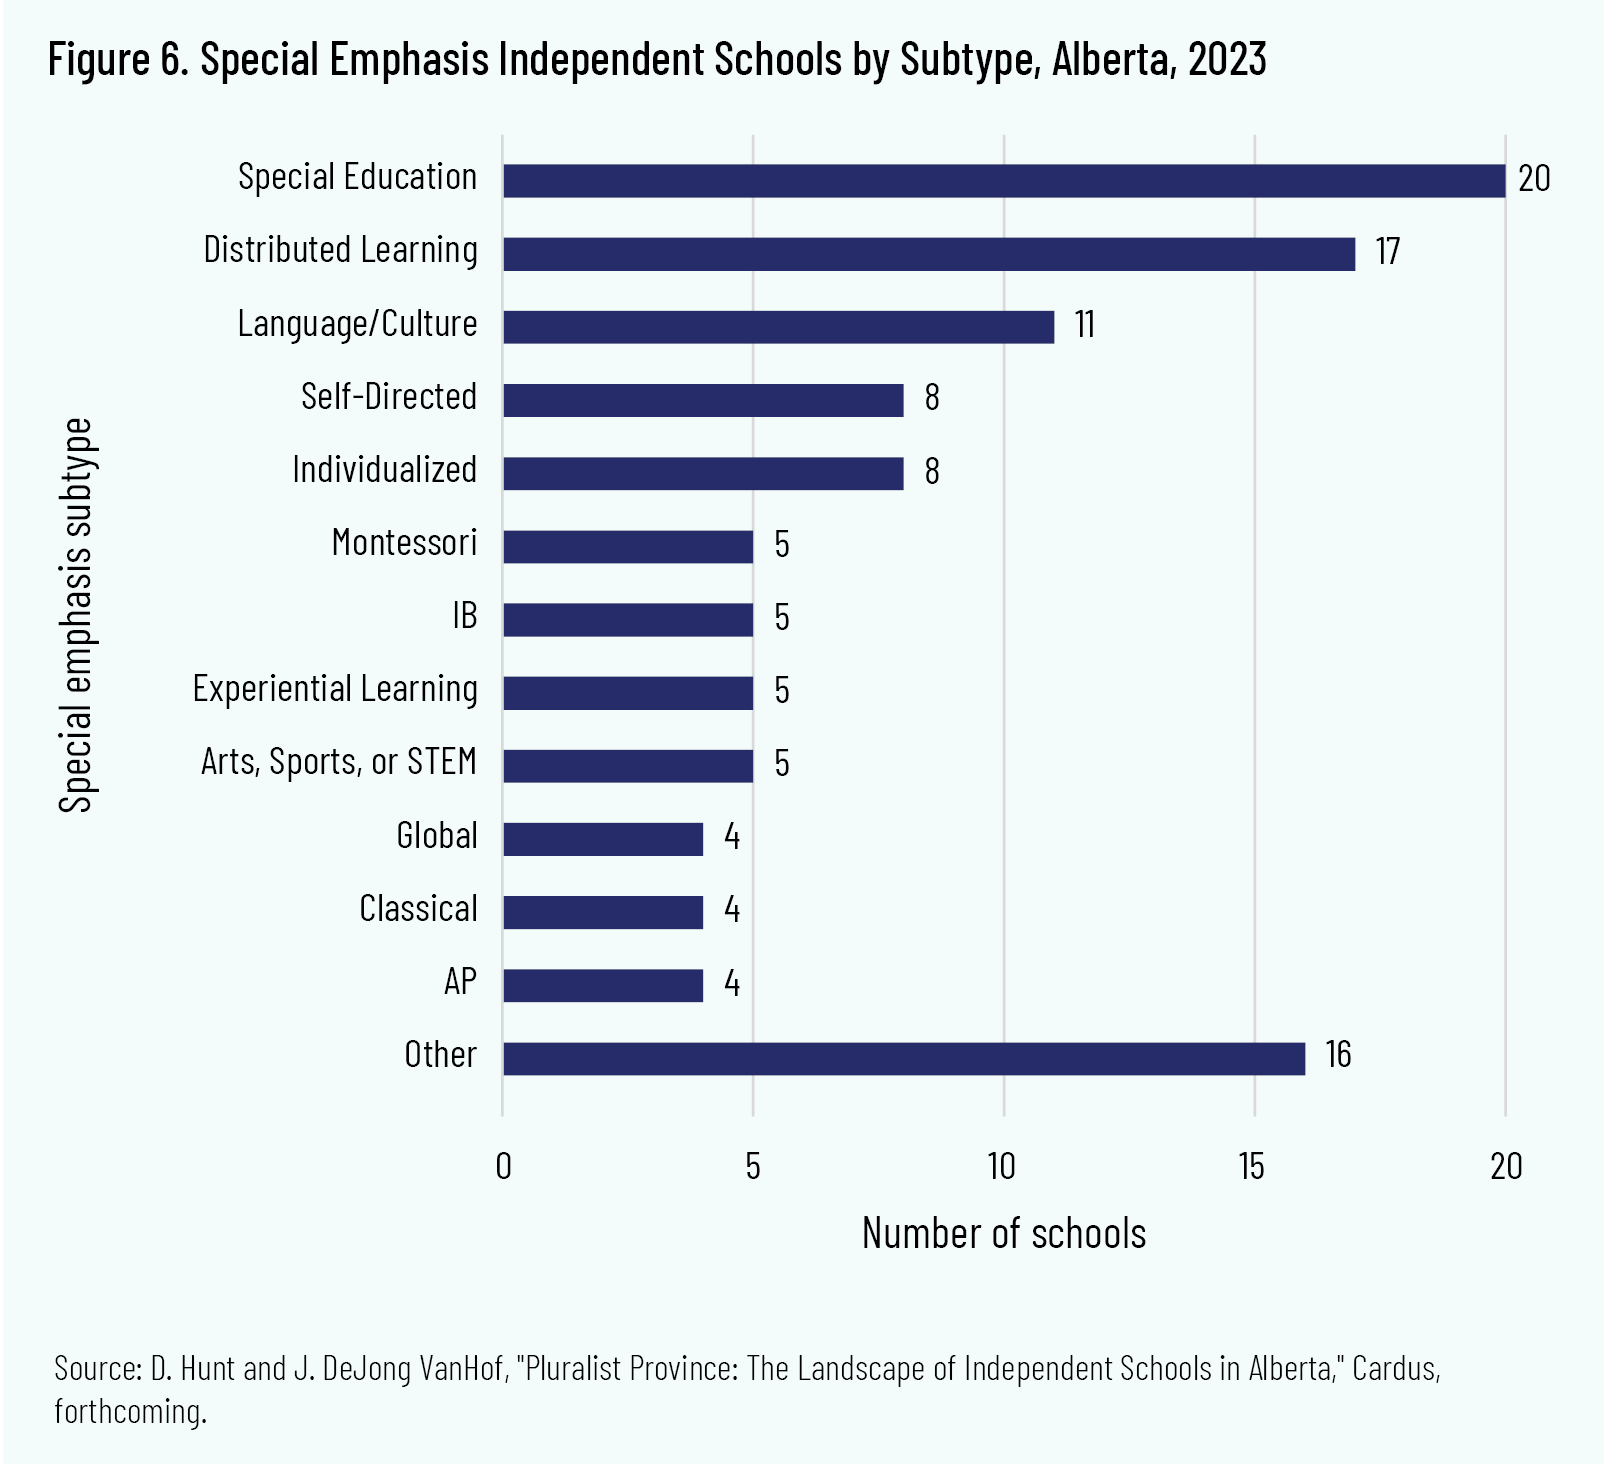 Figure 6. Special Emphasis Independent Schools by Subtype, Alberta, 2023